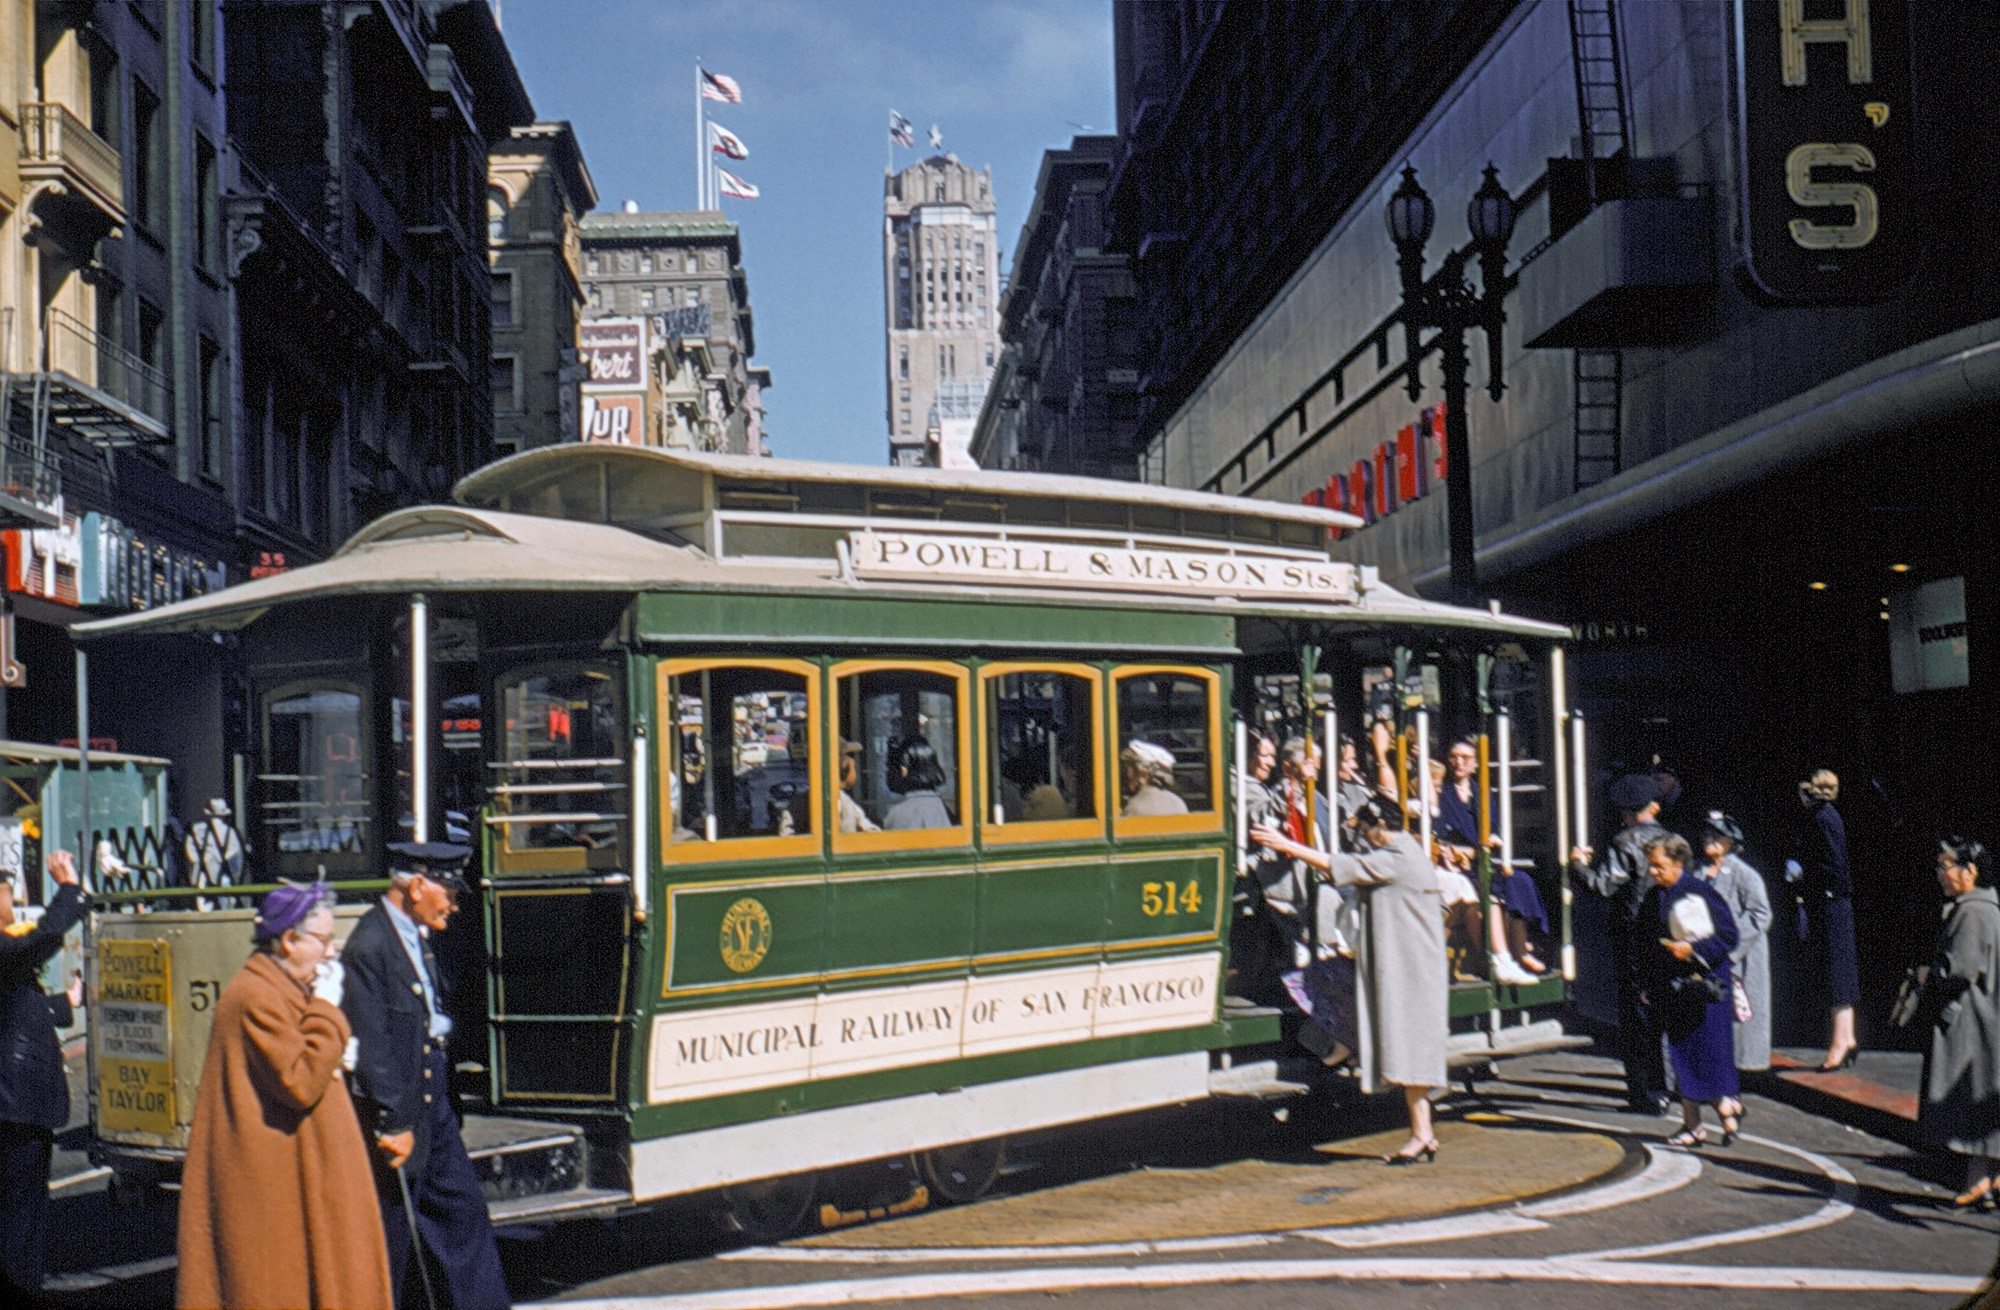 San Francisco, 1957. Taken by my grandfather, Glenn Carlyle, while he was vacationing on the west coast. View full size.